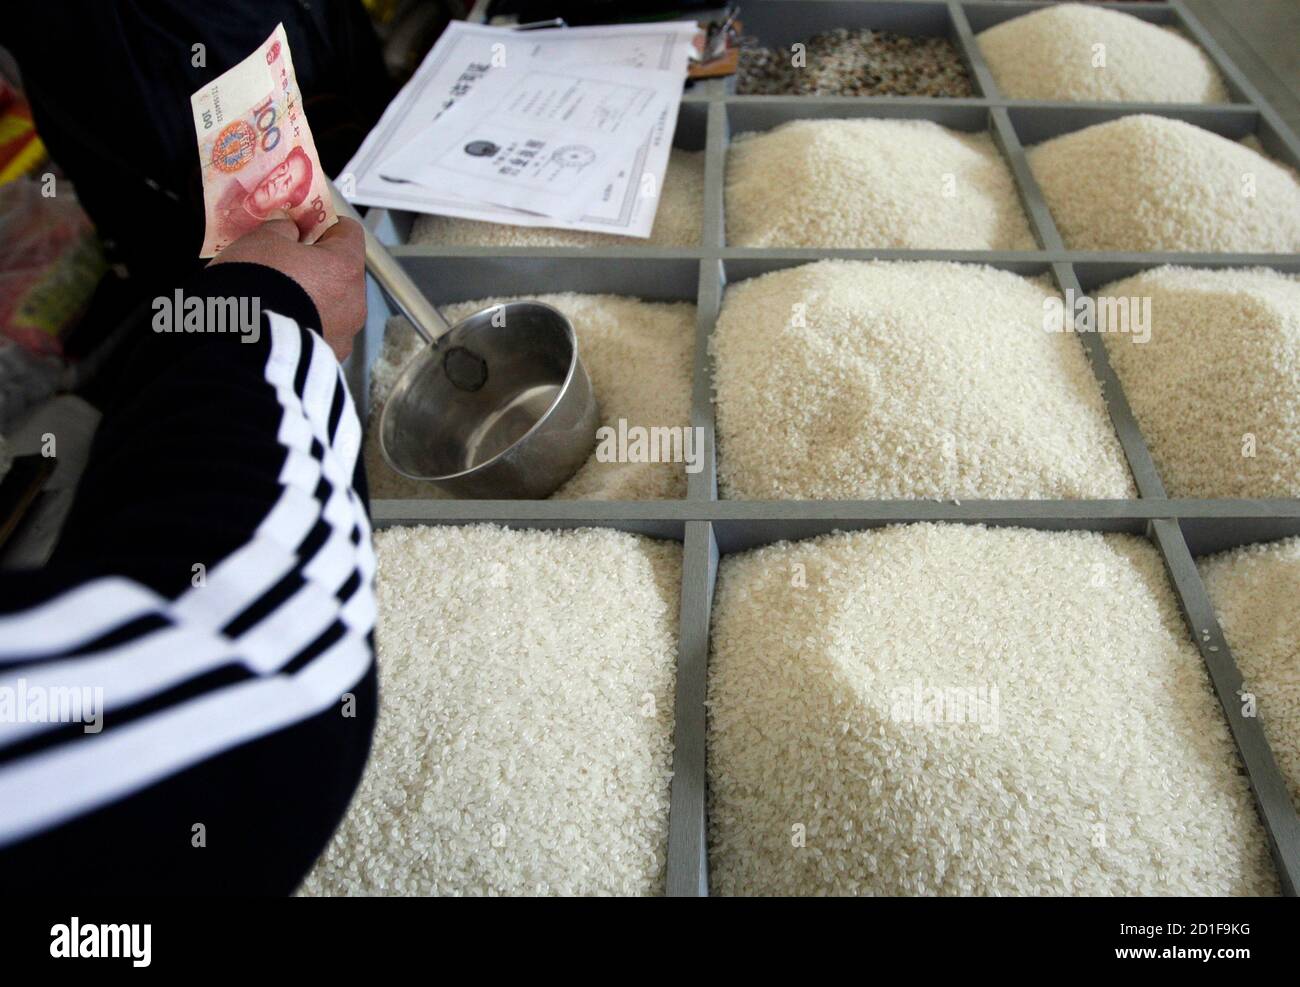 A customer pays for rice at a market in Beijing April 3, 2008. World rice production is set to increase by 1.8 percent this year as government incentives and high prices spur output in Asia and Africa, the United Nations Food and Agriculture Organisation (FAO) said on Wednesday. REUTERS/Jason Lee (CHINA) Stock Photo